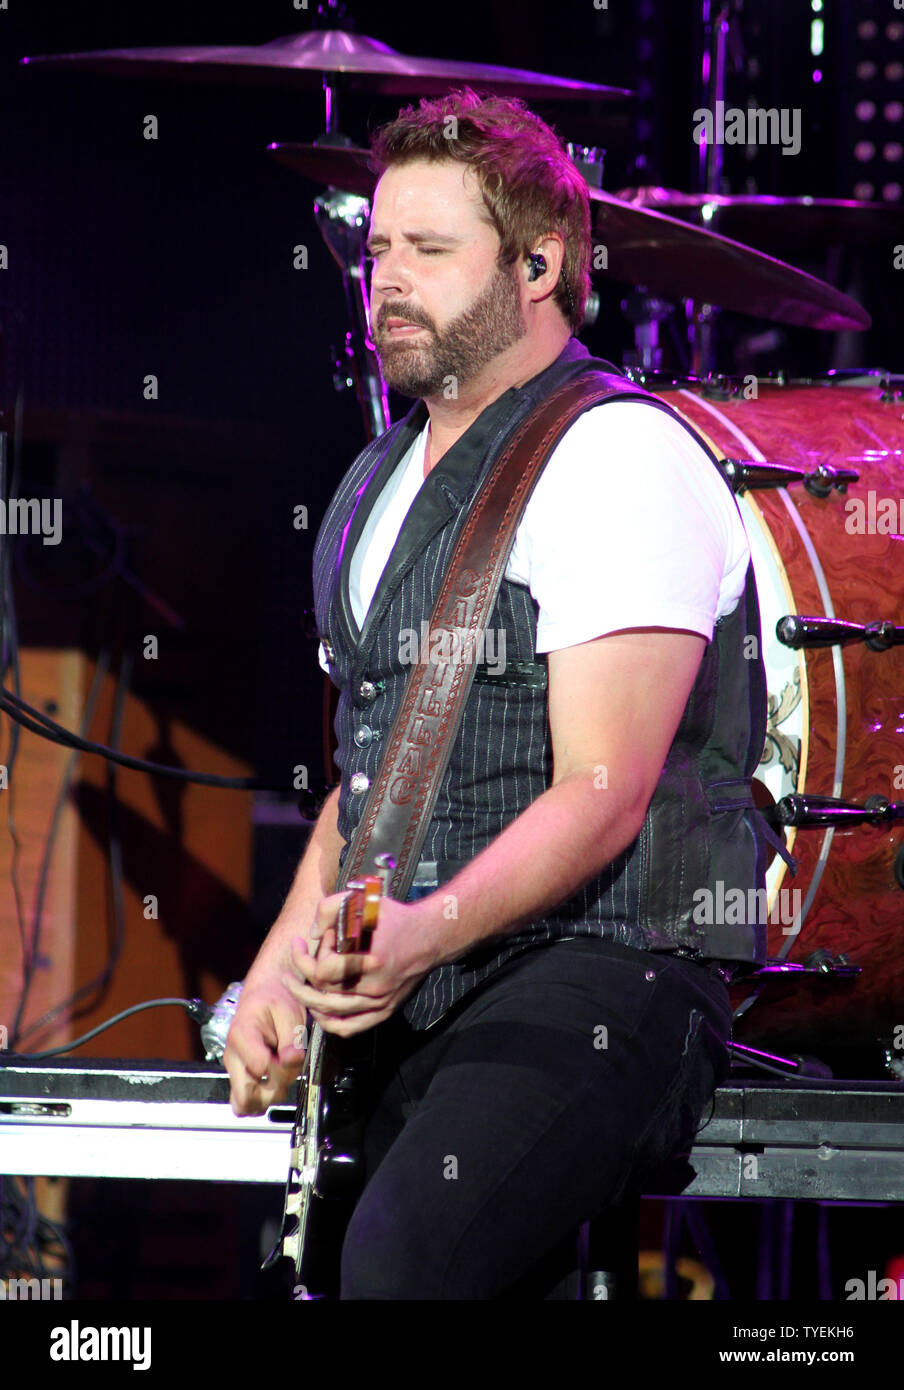 Randy Houser performs in concert at the Cruzan Amphitheatre in West Palm Beach, Florida on August 16, 2014. UPI/Michael Bush Stock Photo